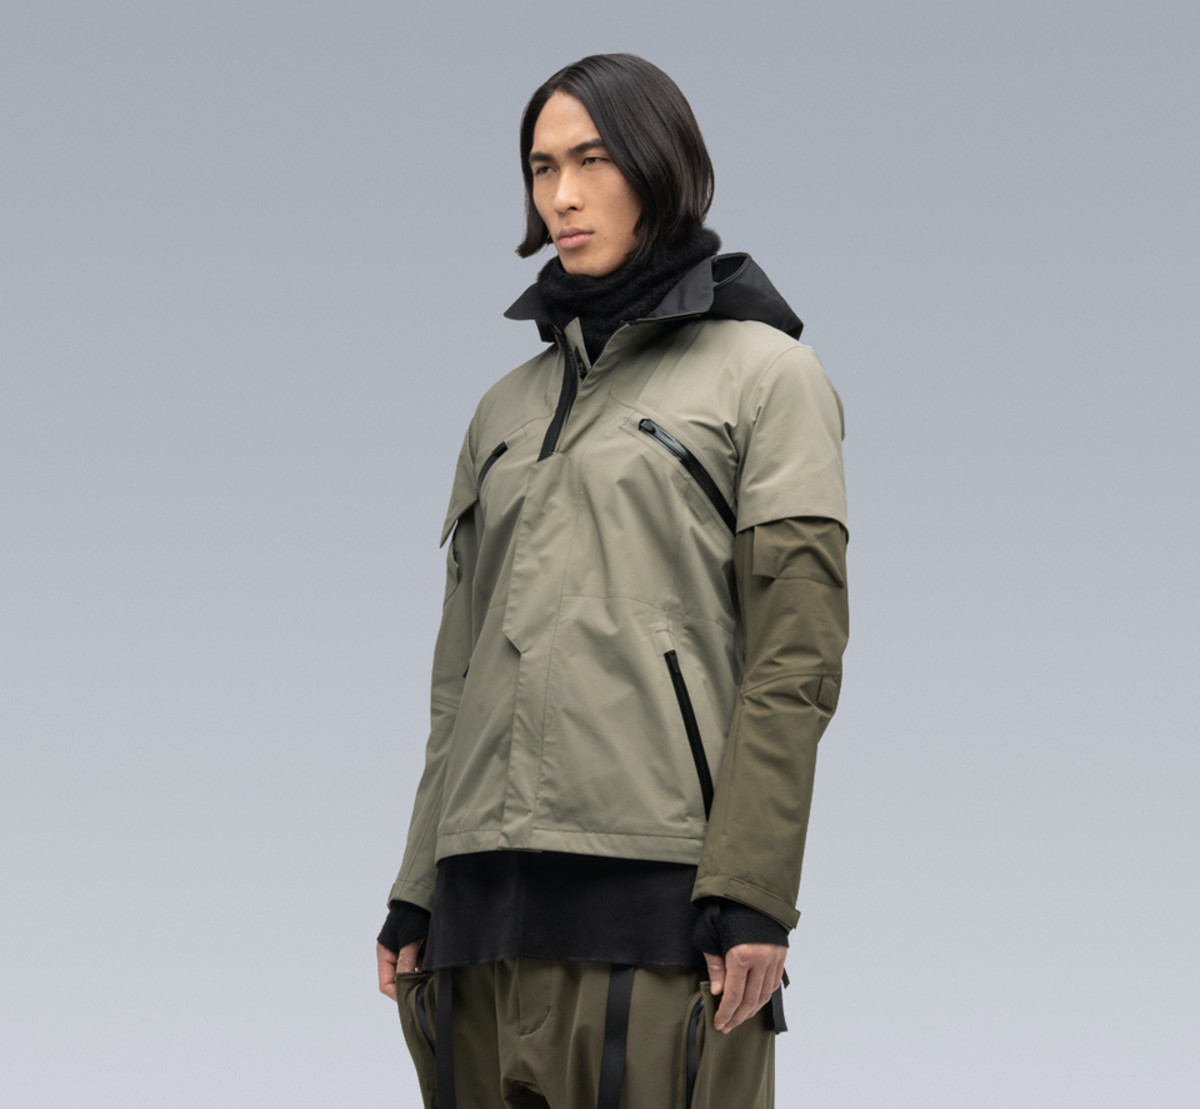 Acronym previews its FW2021 collection - Acquire